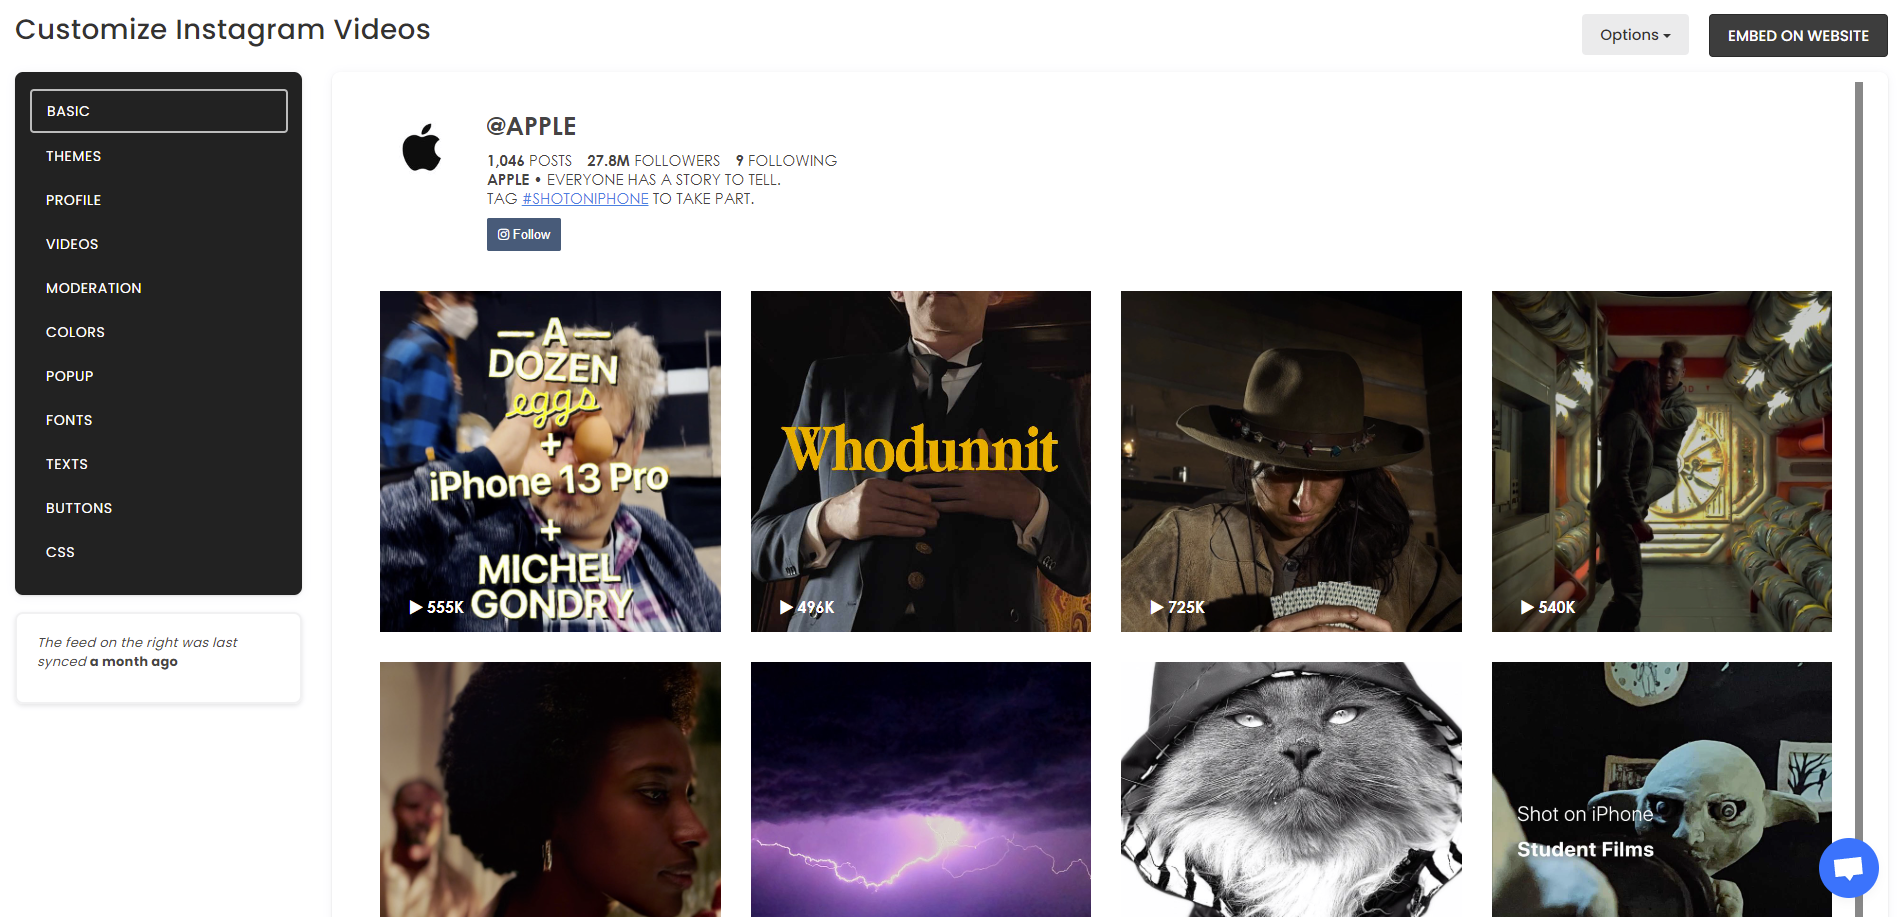 Customize your feed - Free Instagram Videos Widget For Squarespace Website